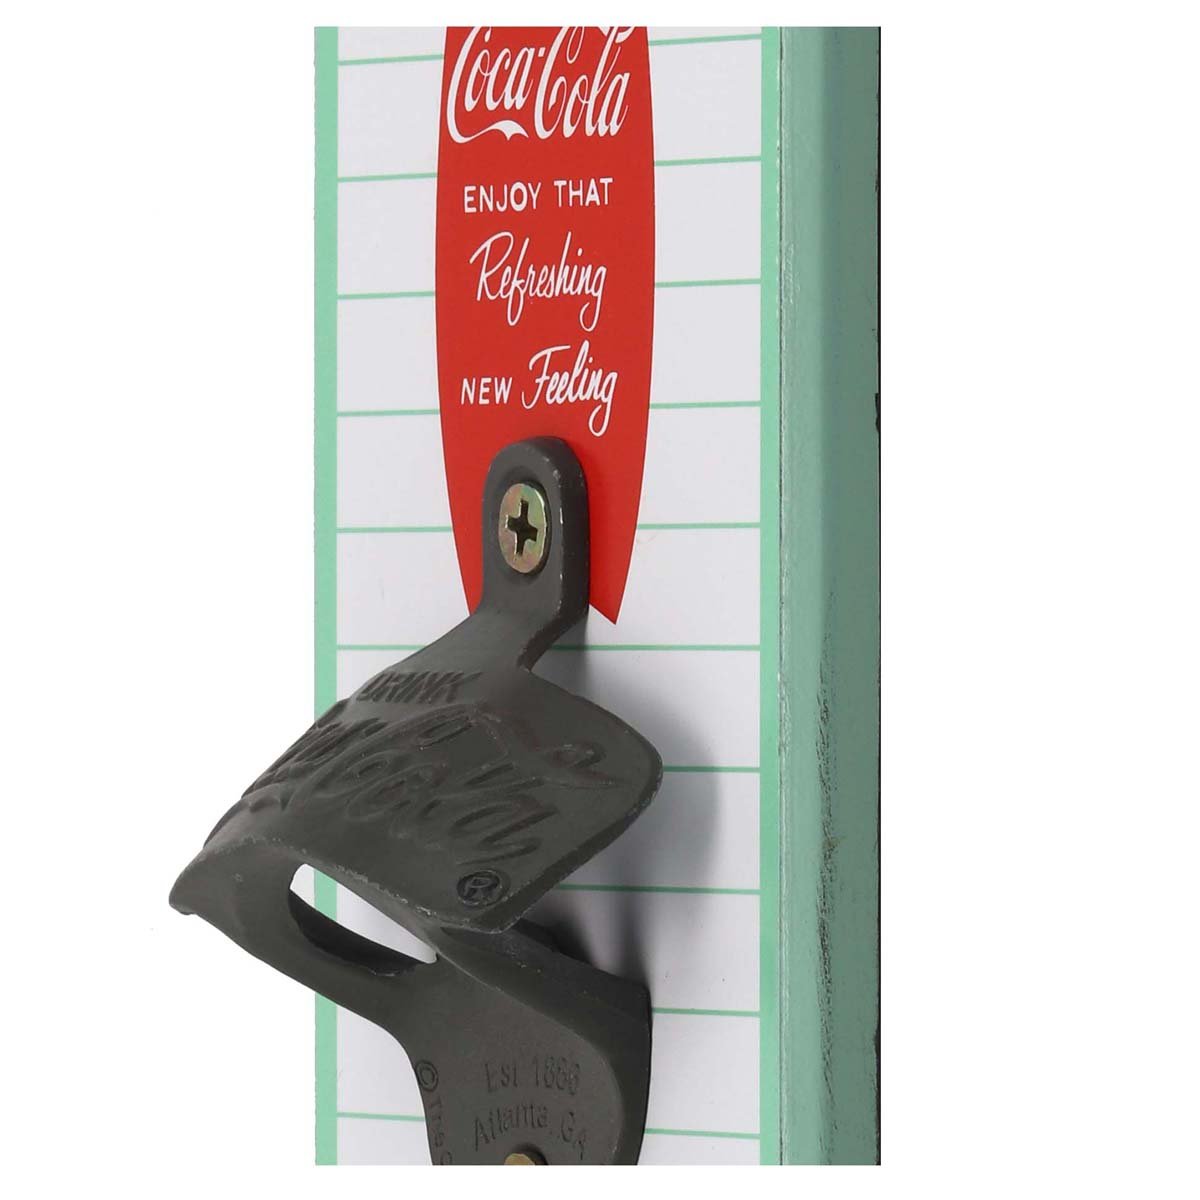 Coca-Cola Striped Wall Bottle Opener - Vintage Coca-Cola Bottle Opener Made with Wood and Cast Metal - Great Gift Idea